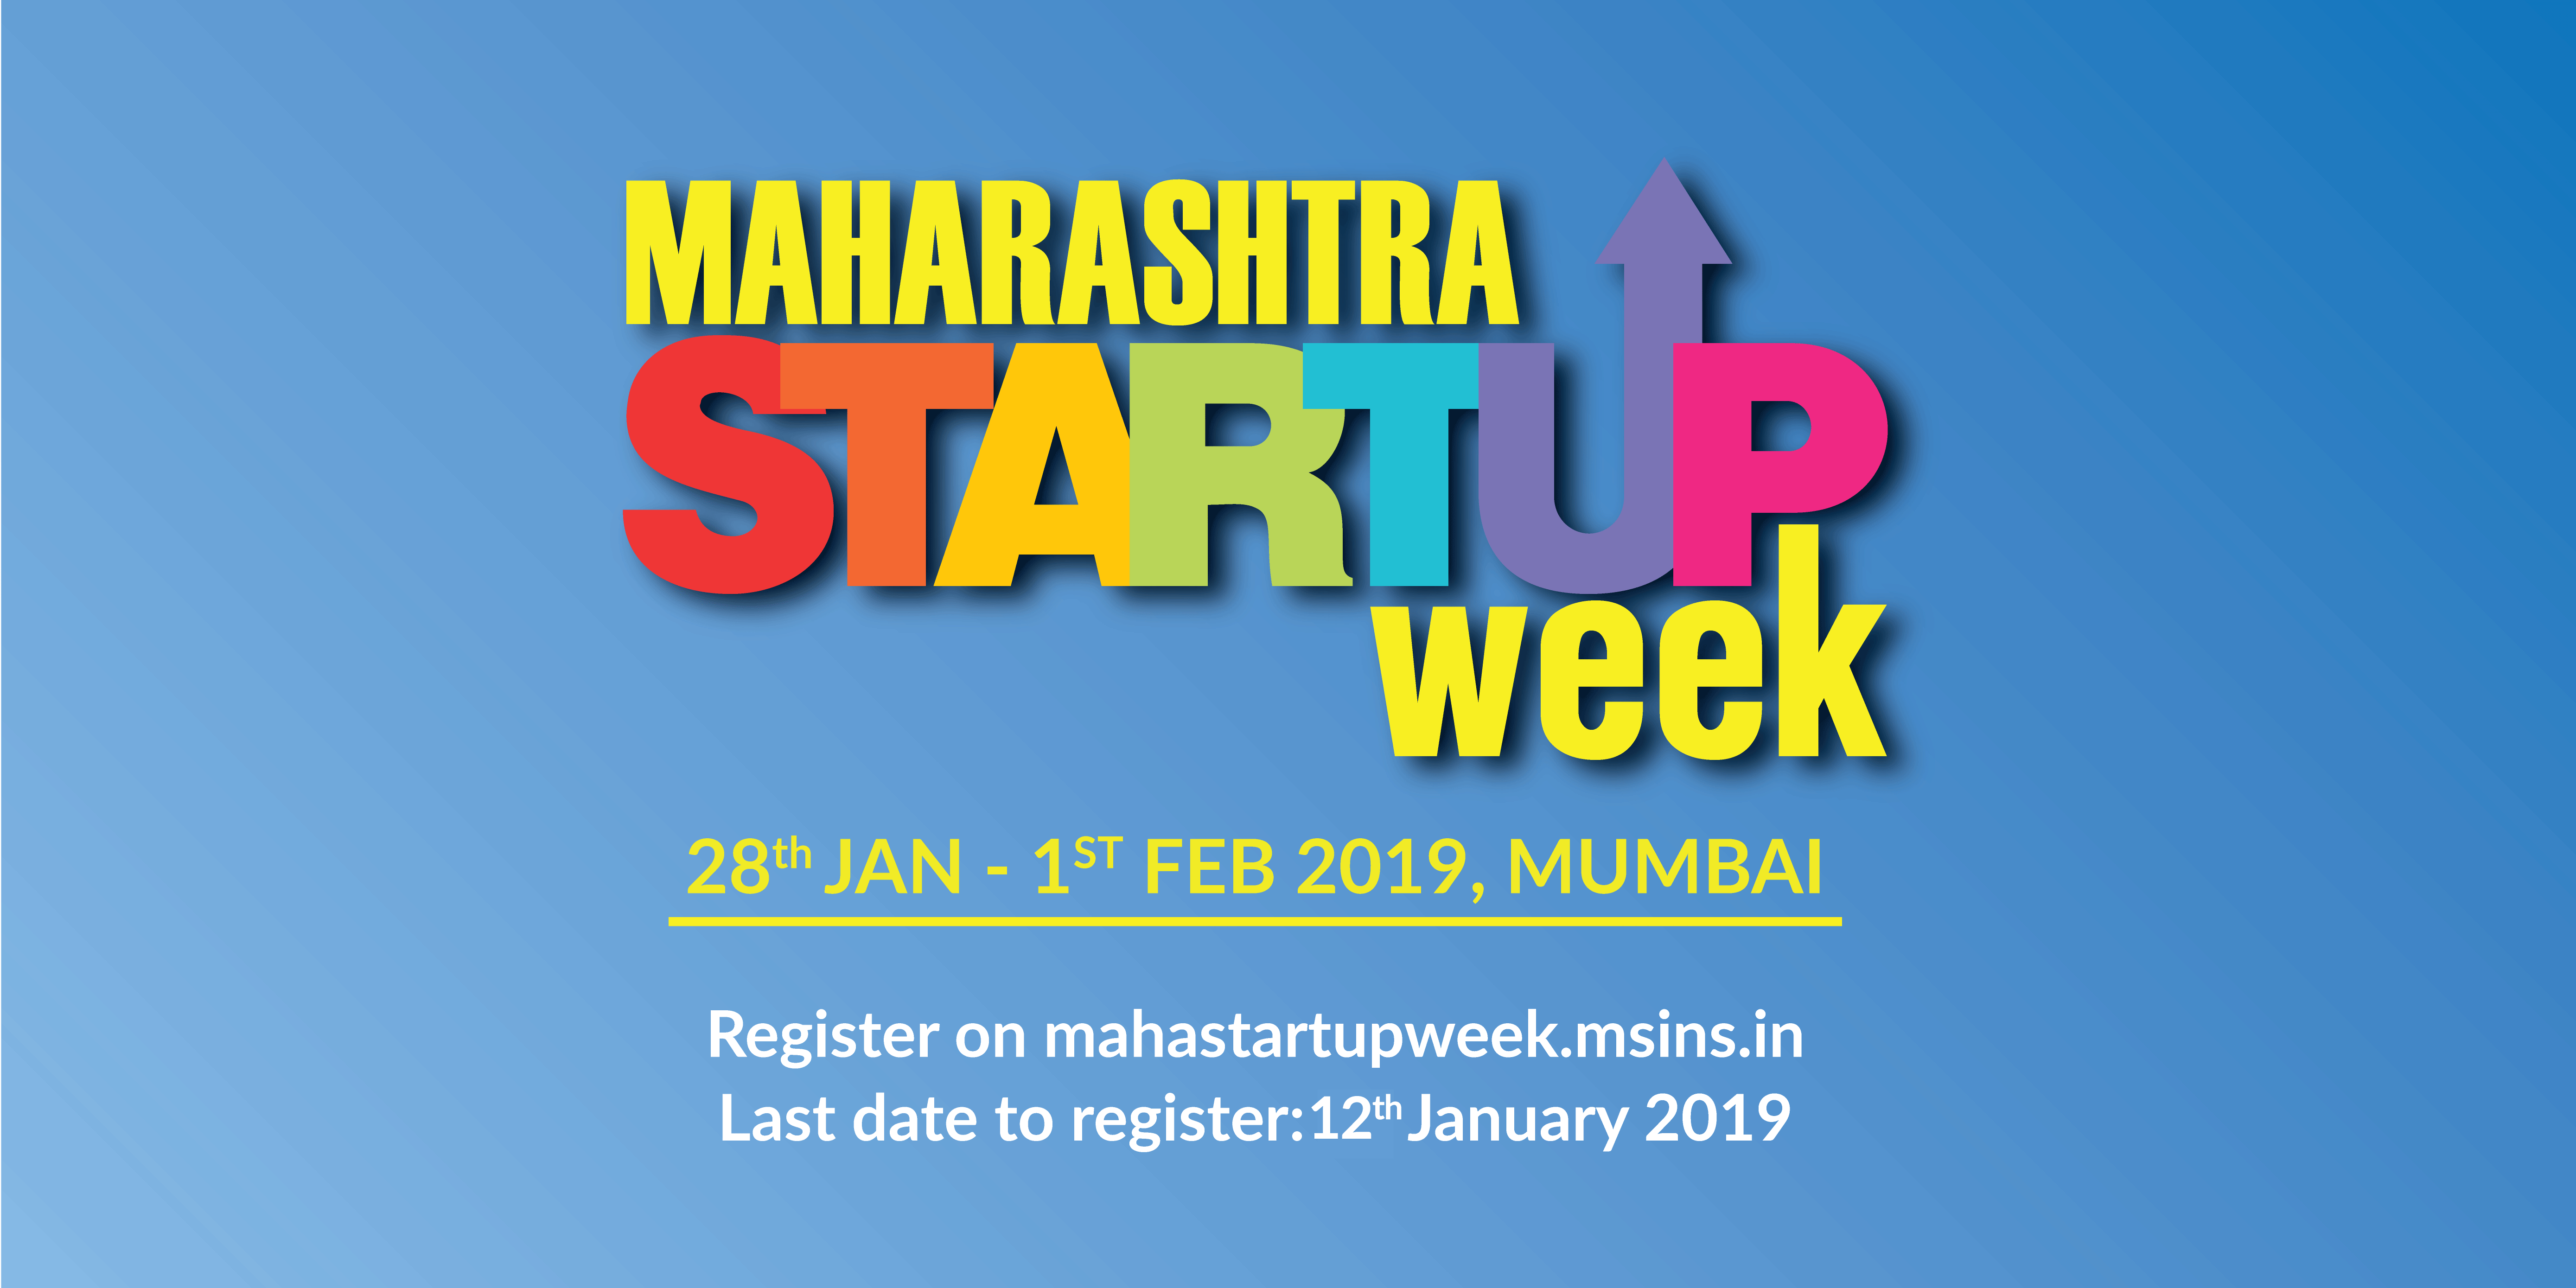 At Maharashtra Startup Week, discover why B2G projects are a win-win for startups and state government